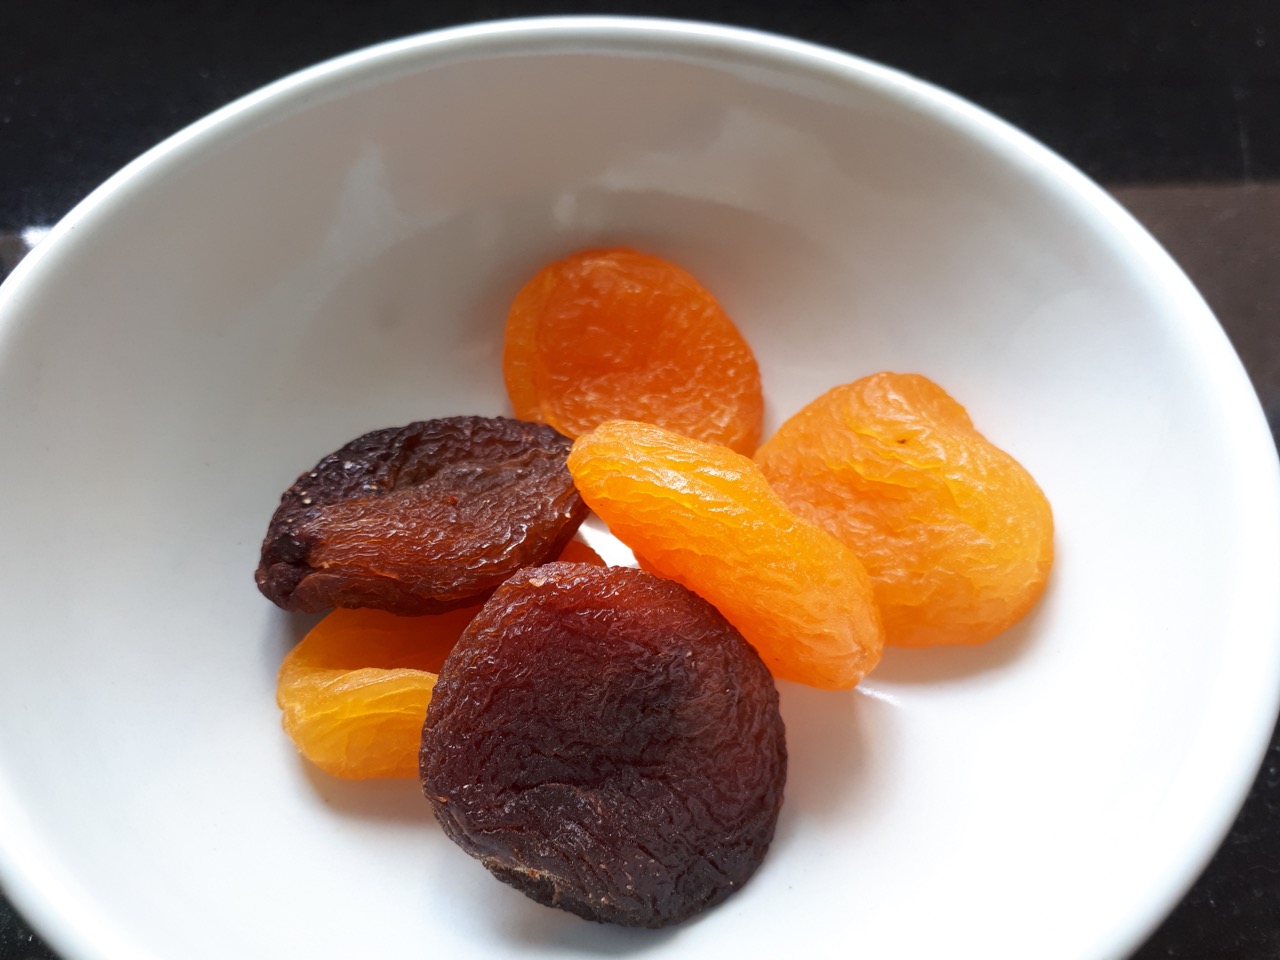 Naturally dried apricots versus apricots treated with sulphites to keep color orange